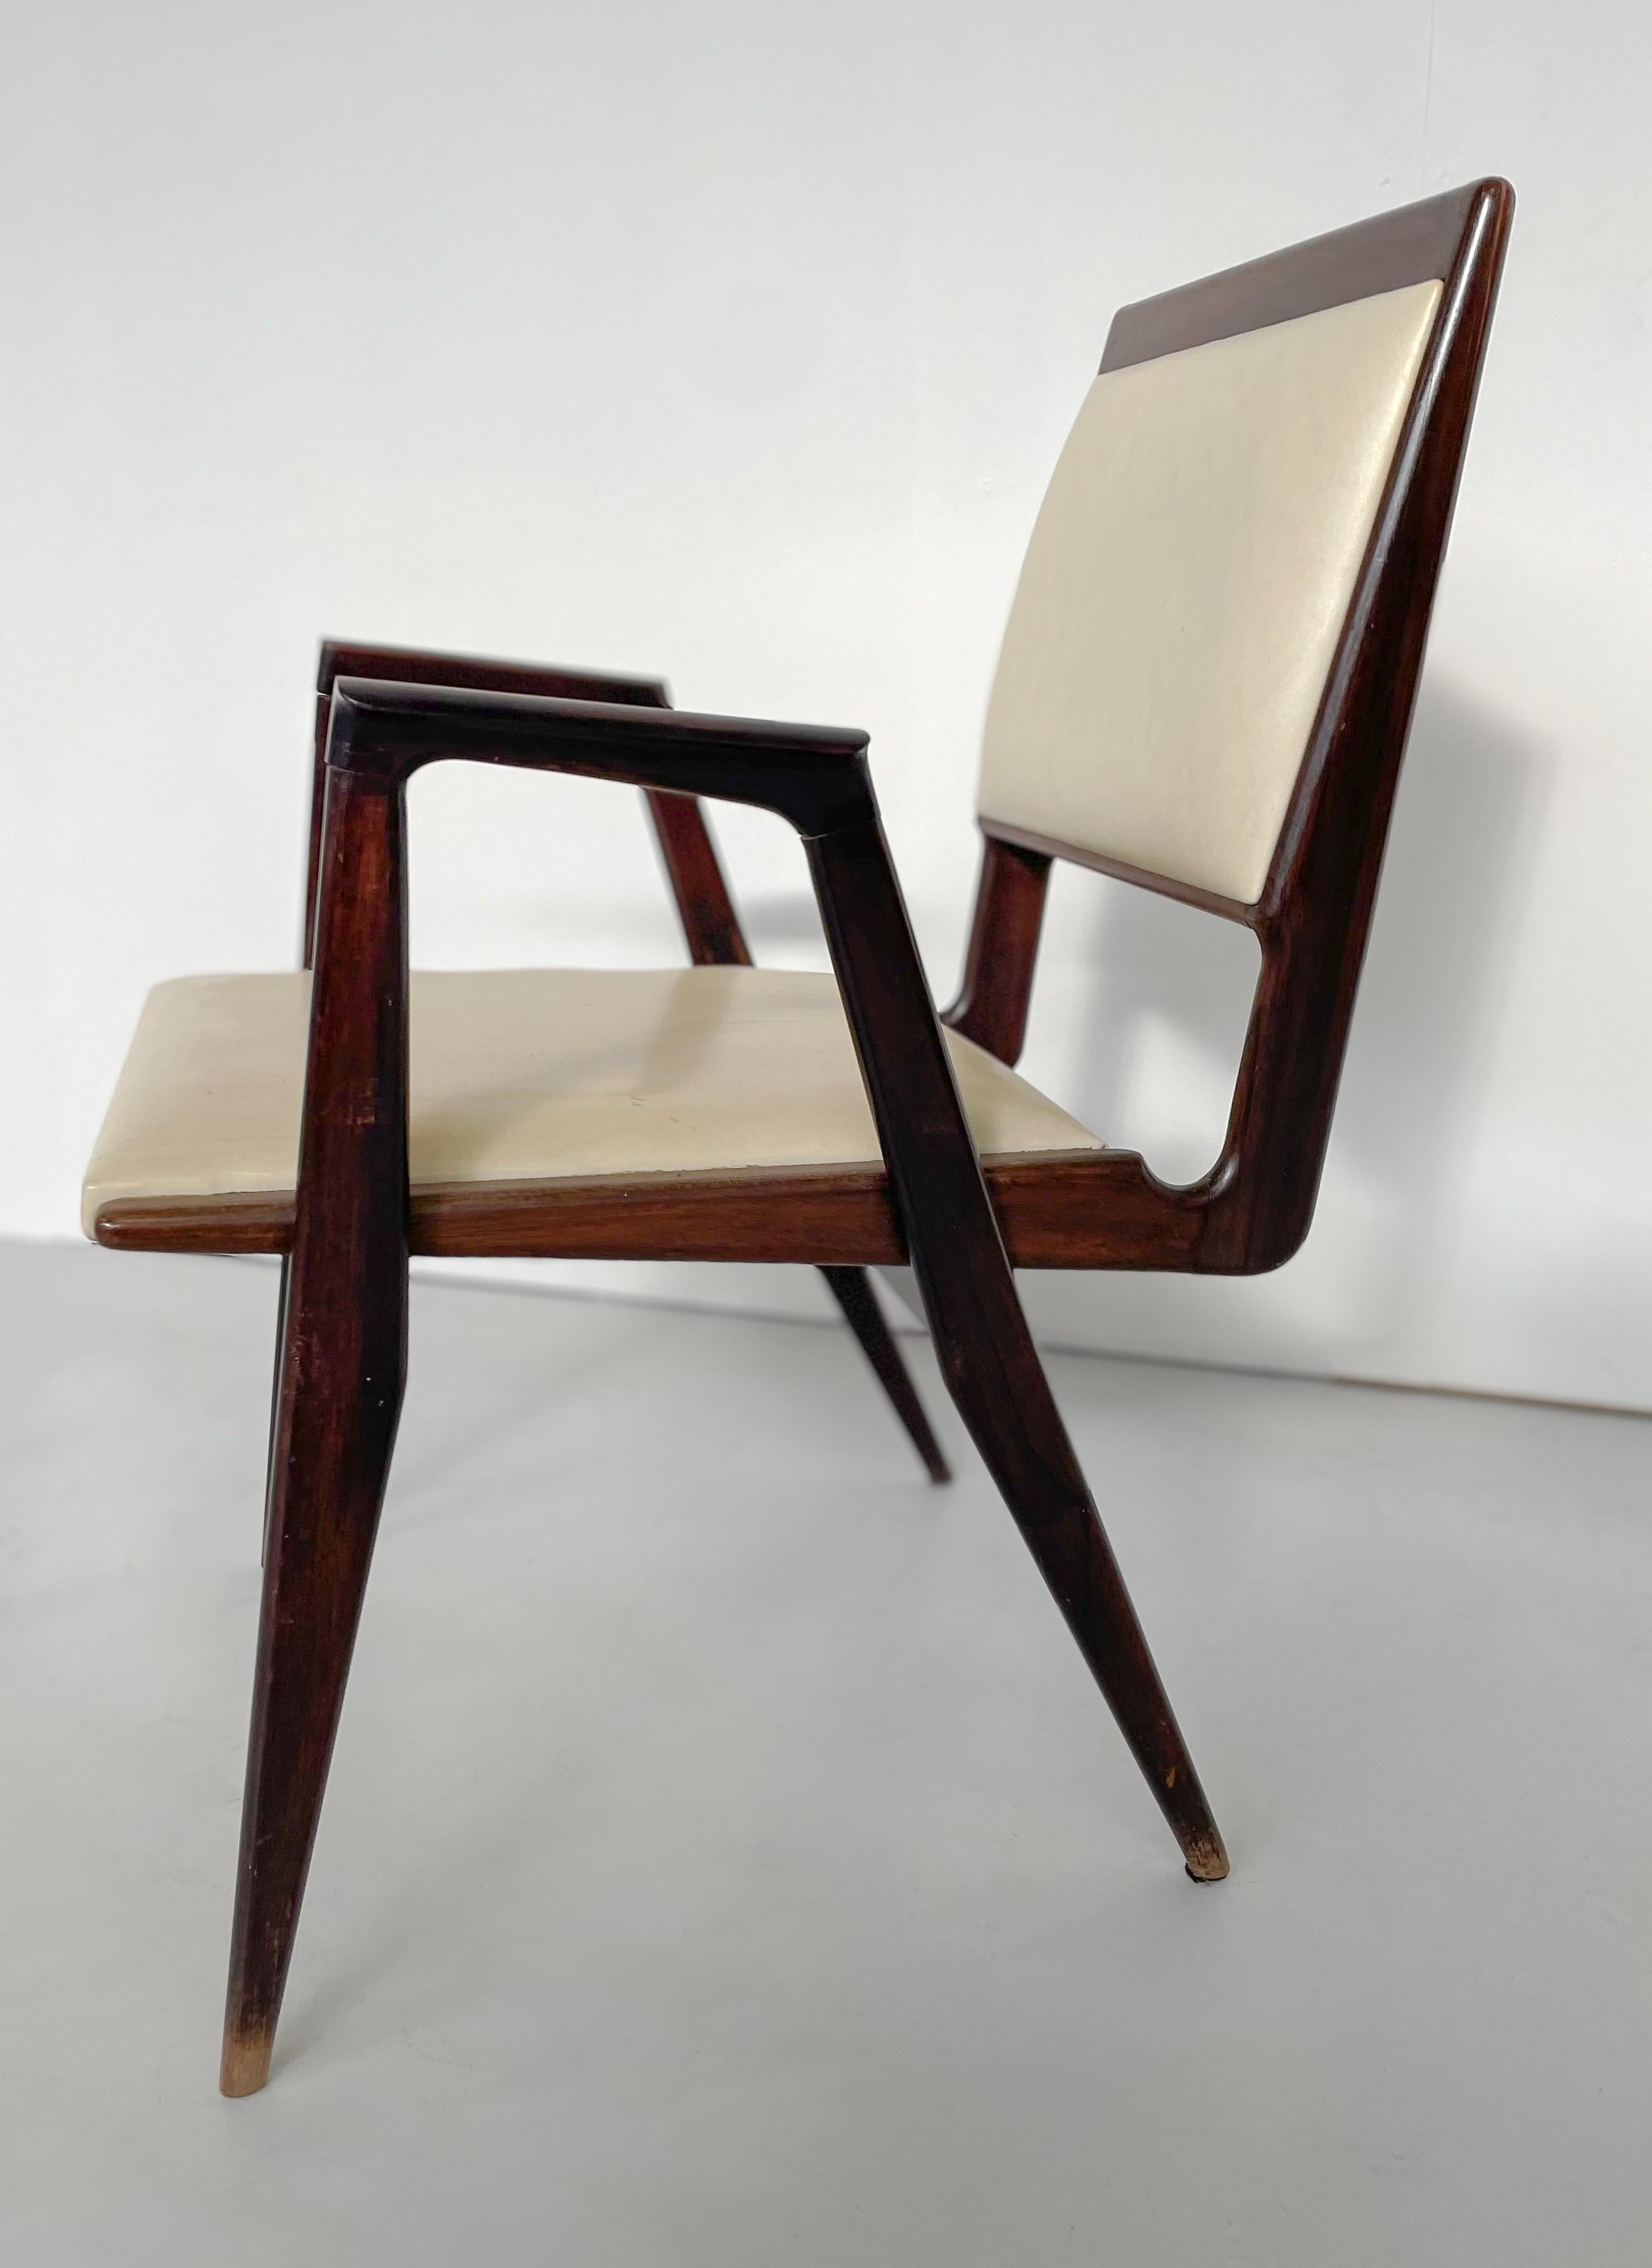 Mid-20th Century Mid-Century Modern Chair in the style of Ico Parisi, Italy, 1950s